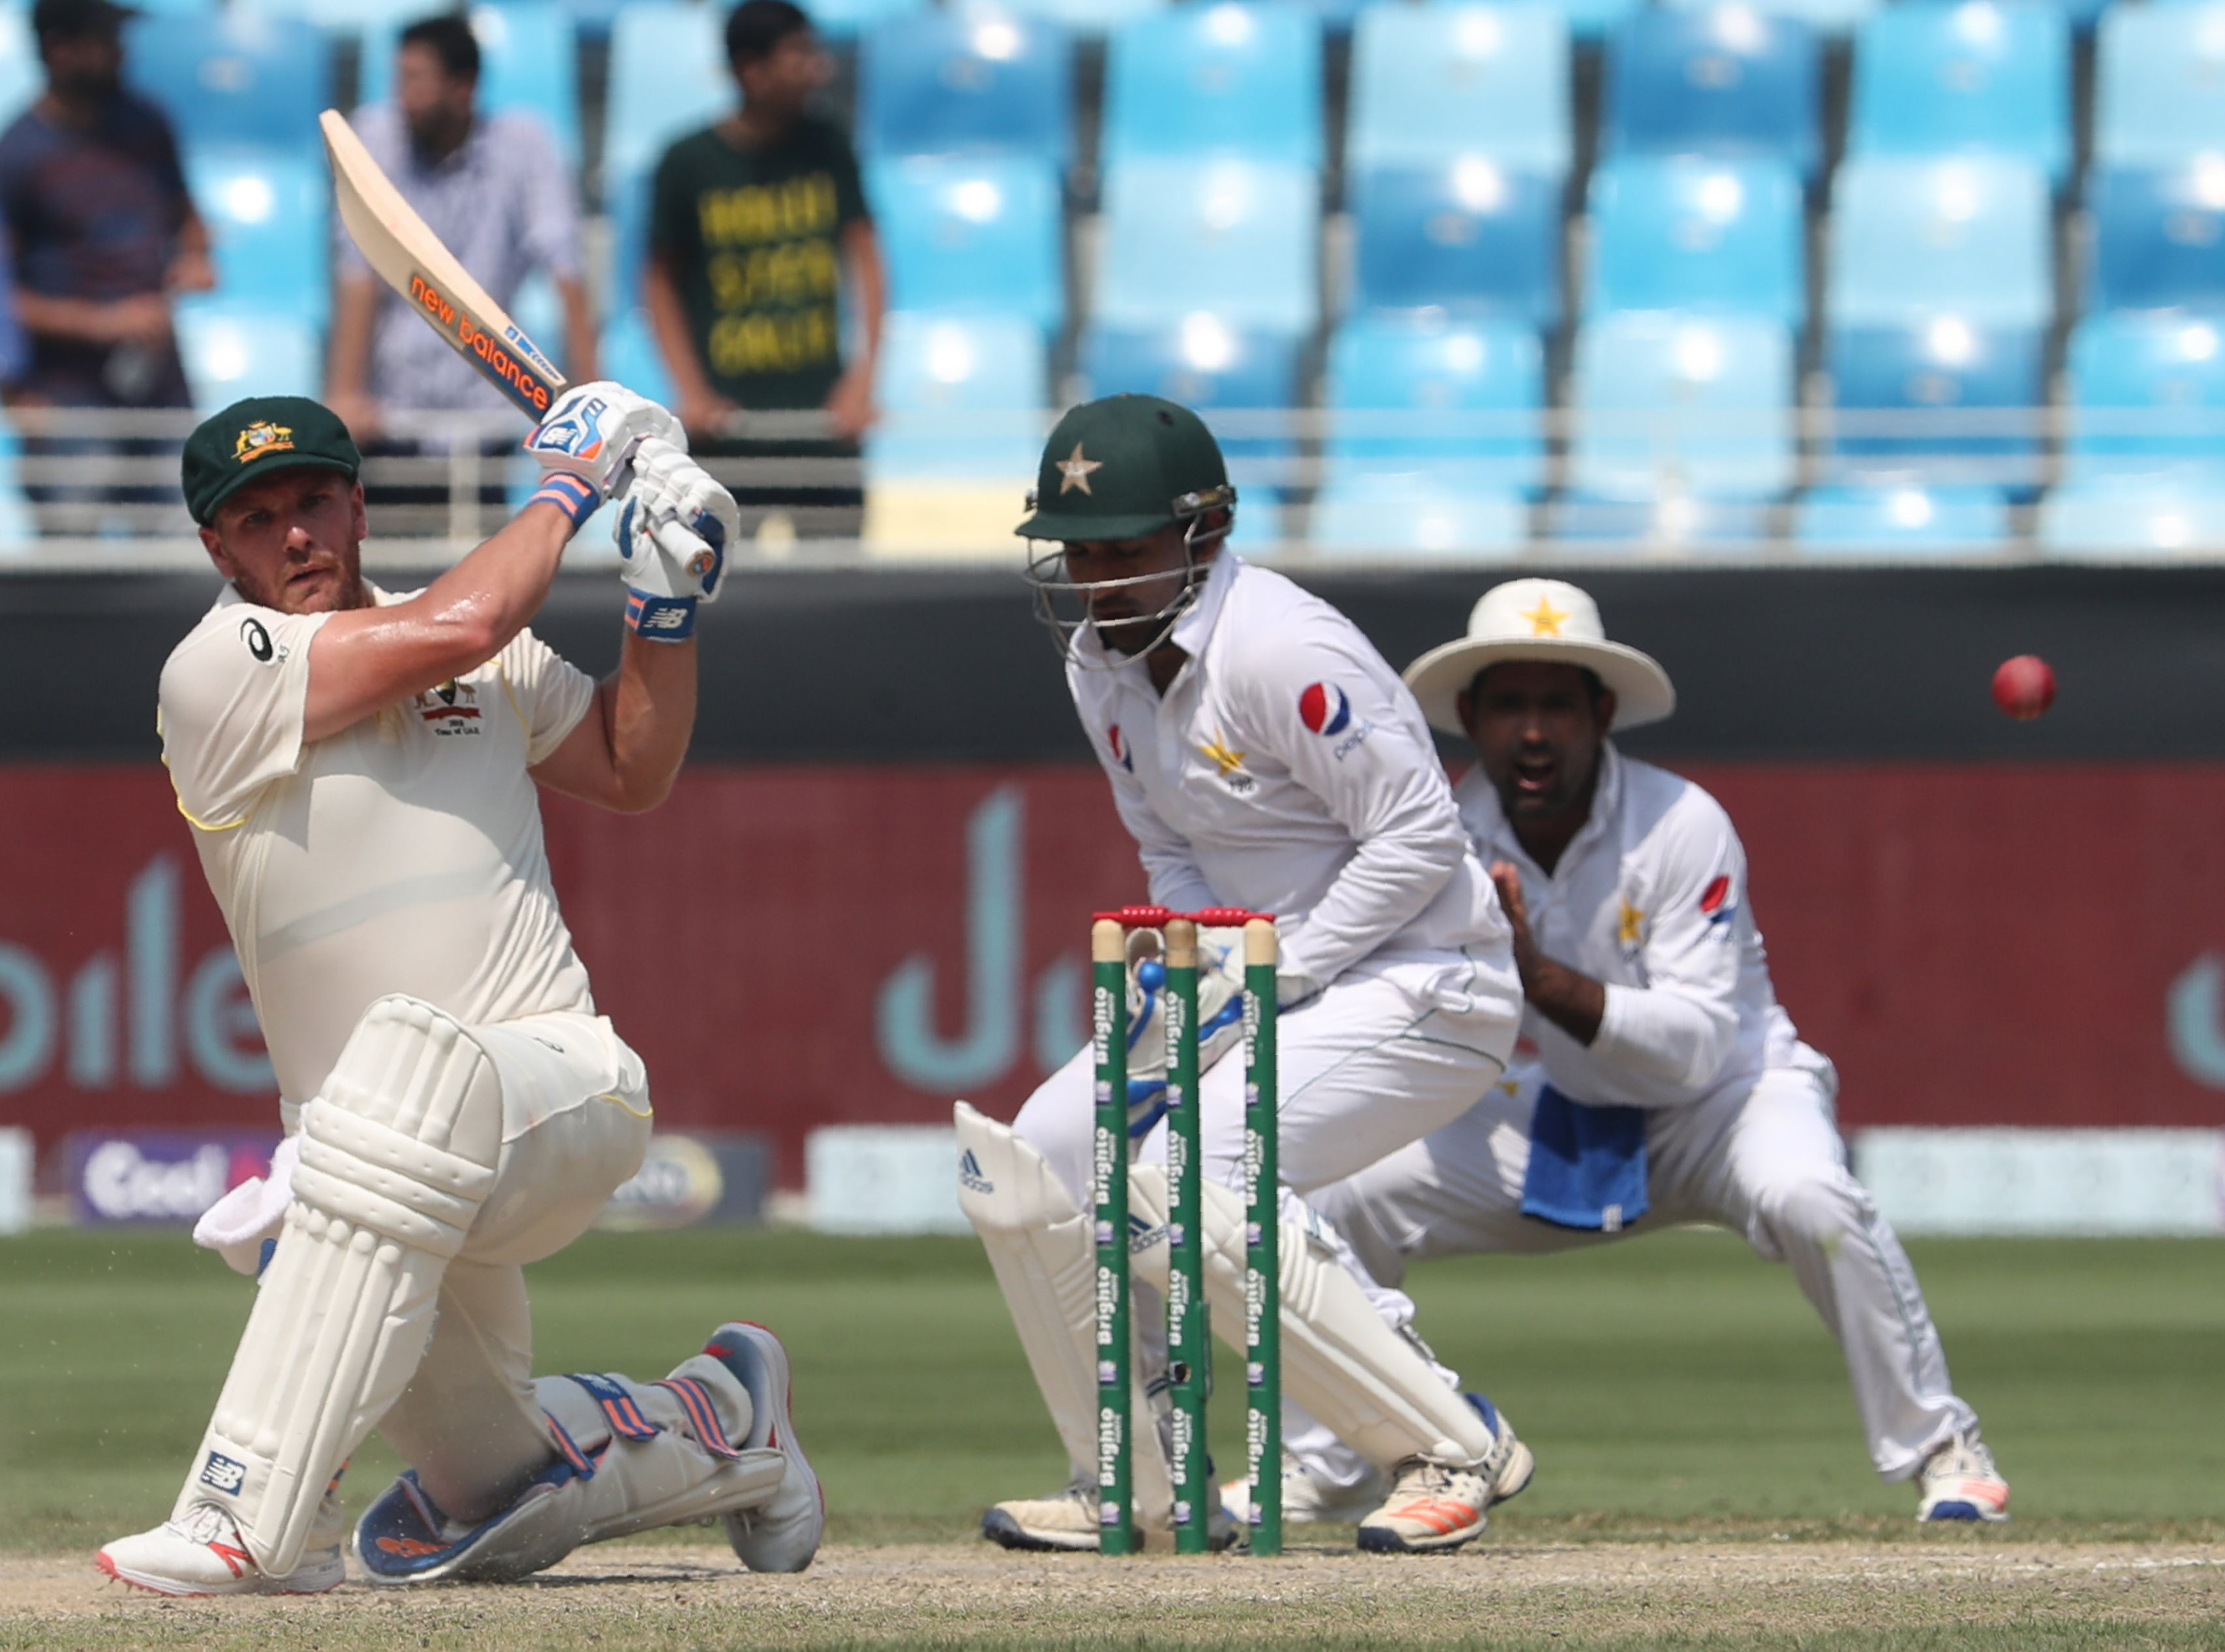 1.	Australian cricketer Aaron Finch (L) plays a shot during the third day of play of the first Test cricket match in the series between Australia and Pakistan at Dubai International Stadium in Dubai on October 9, 2018. (Photo by KARIM SAHIB / AFP)